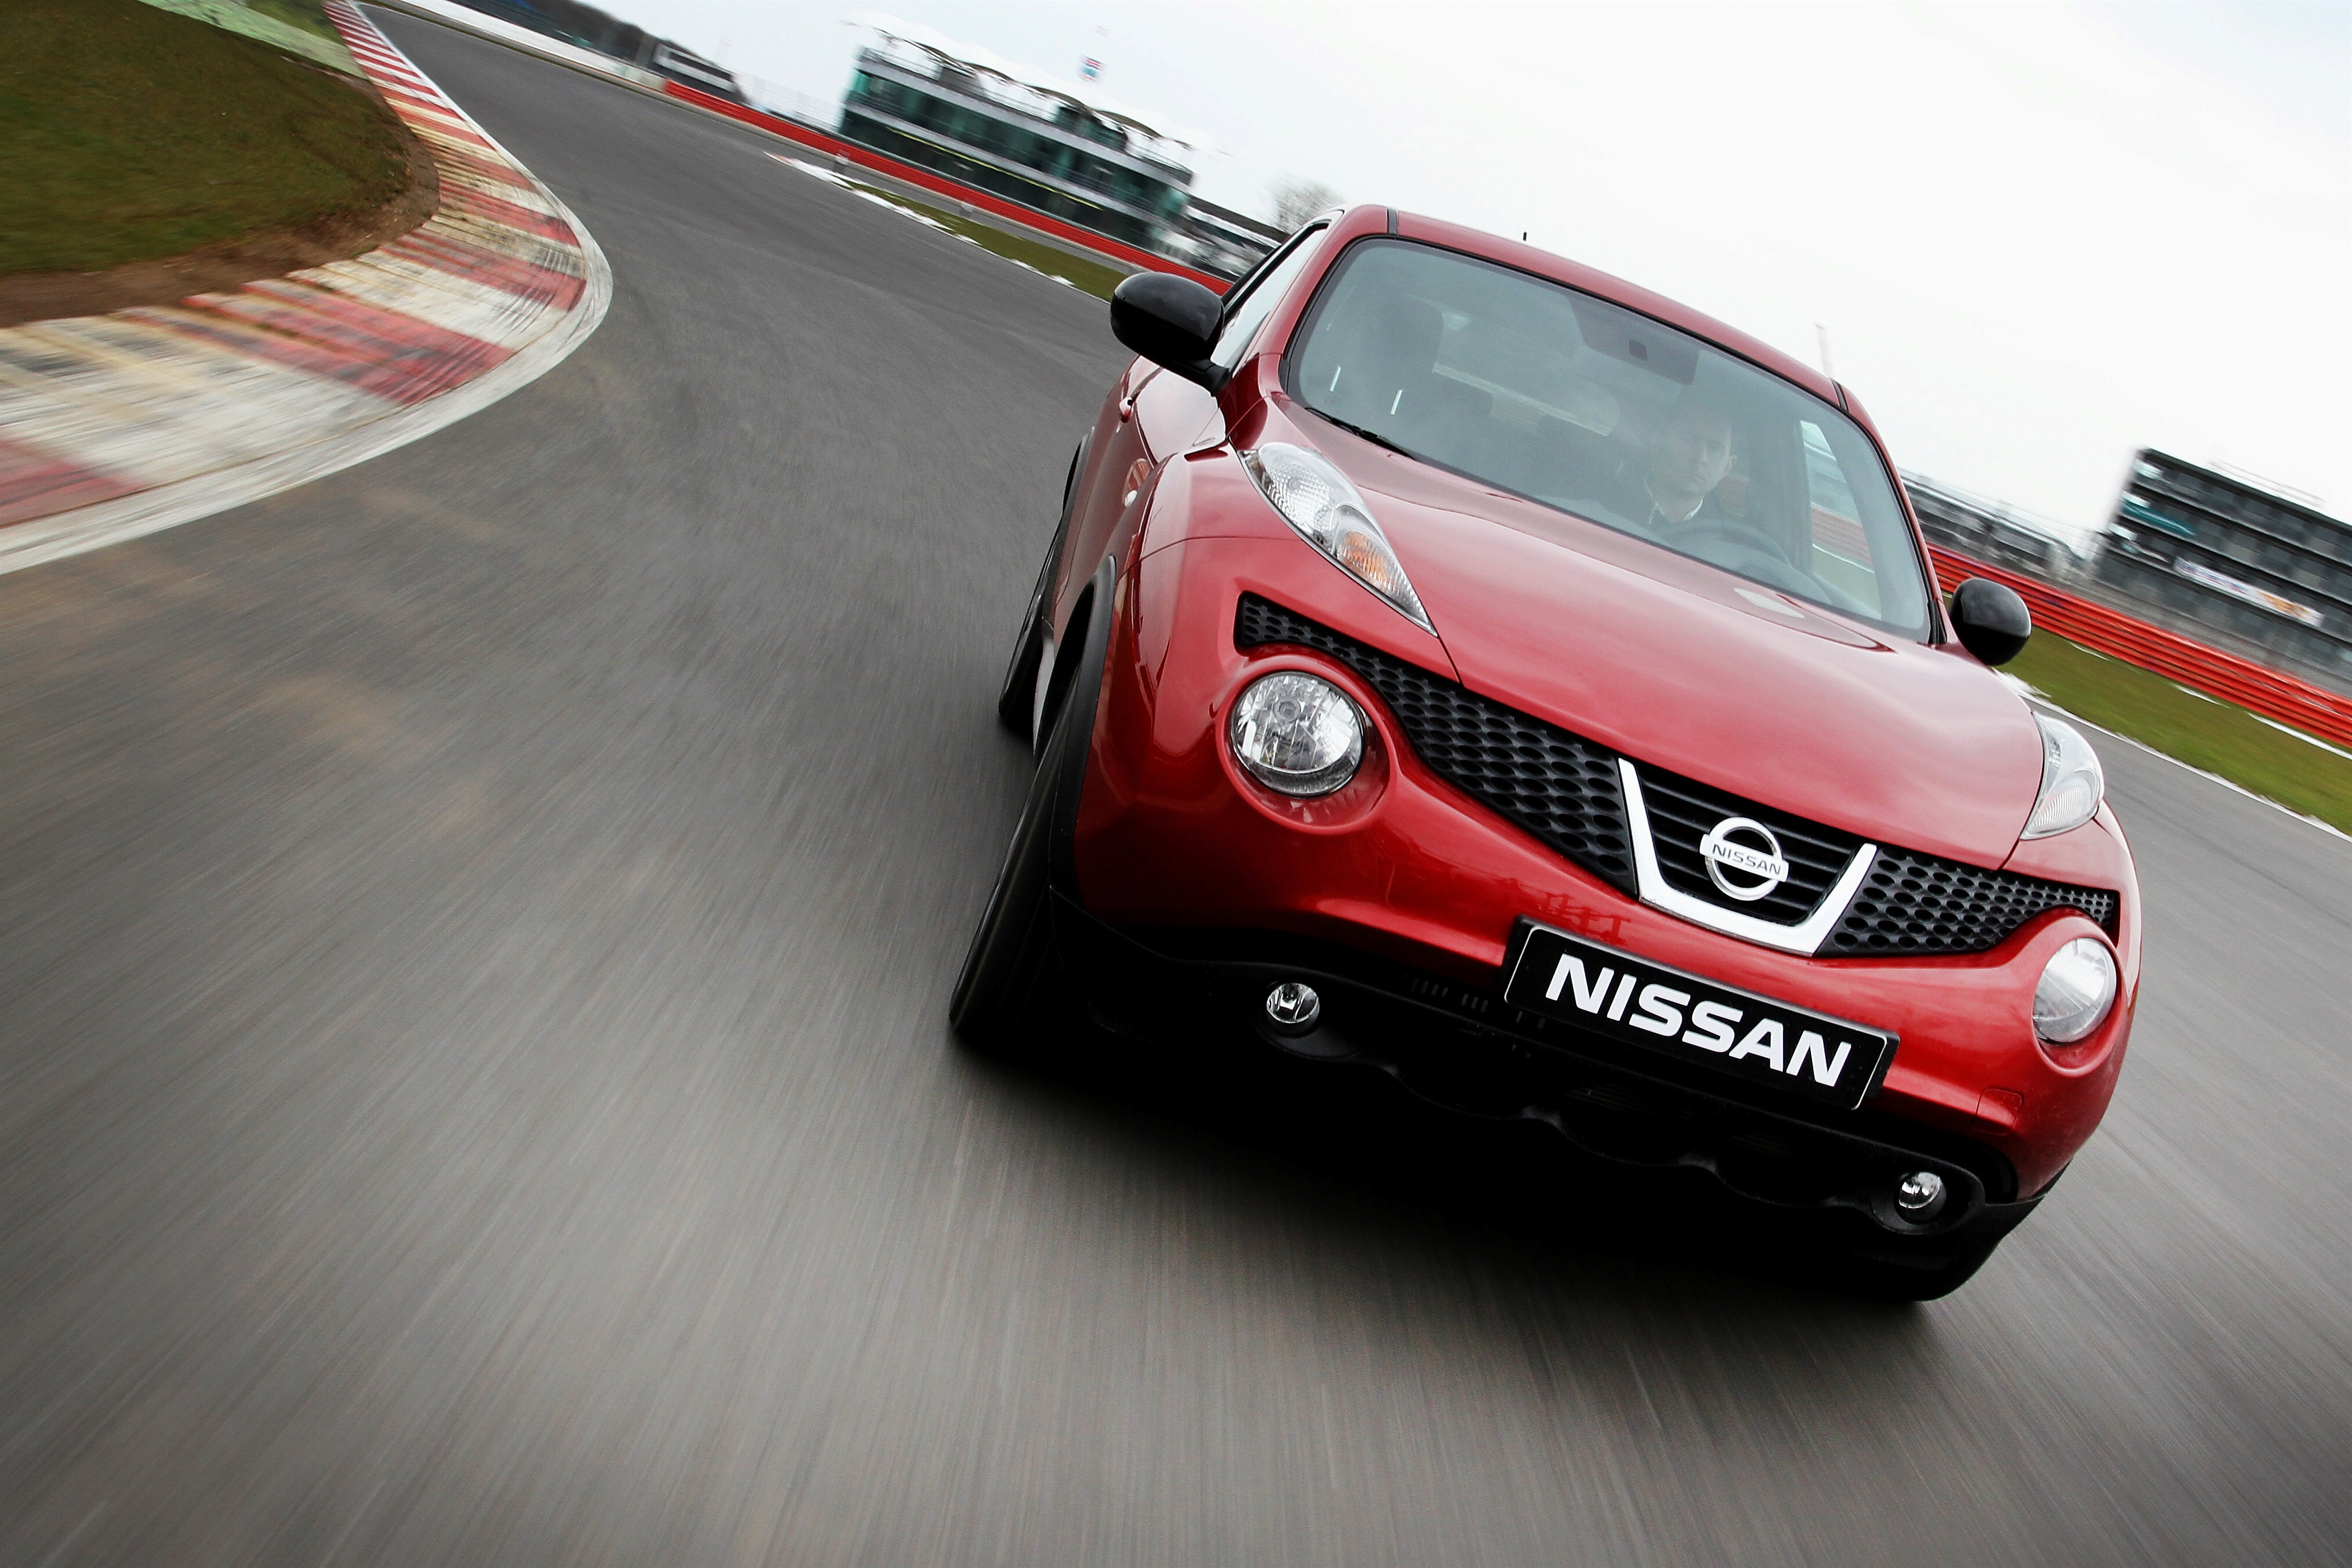 Solid month of sales shows Nissan’s getting it right in Europe – Nissan